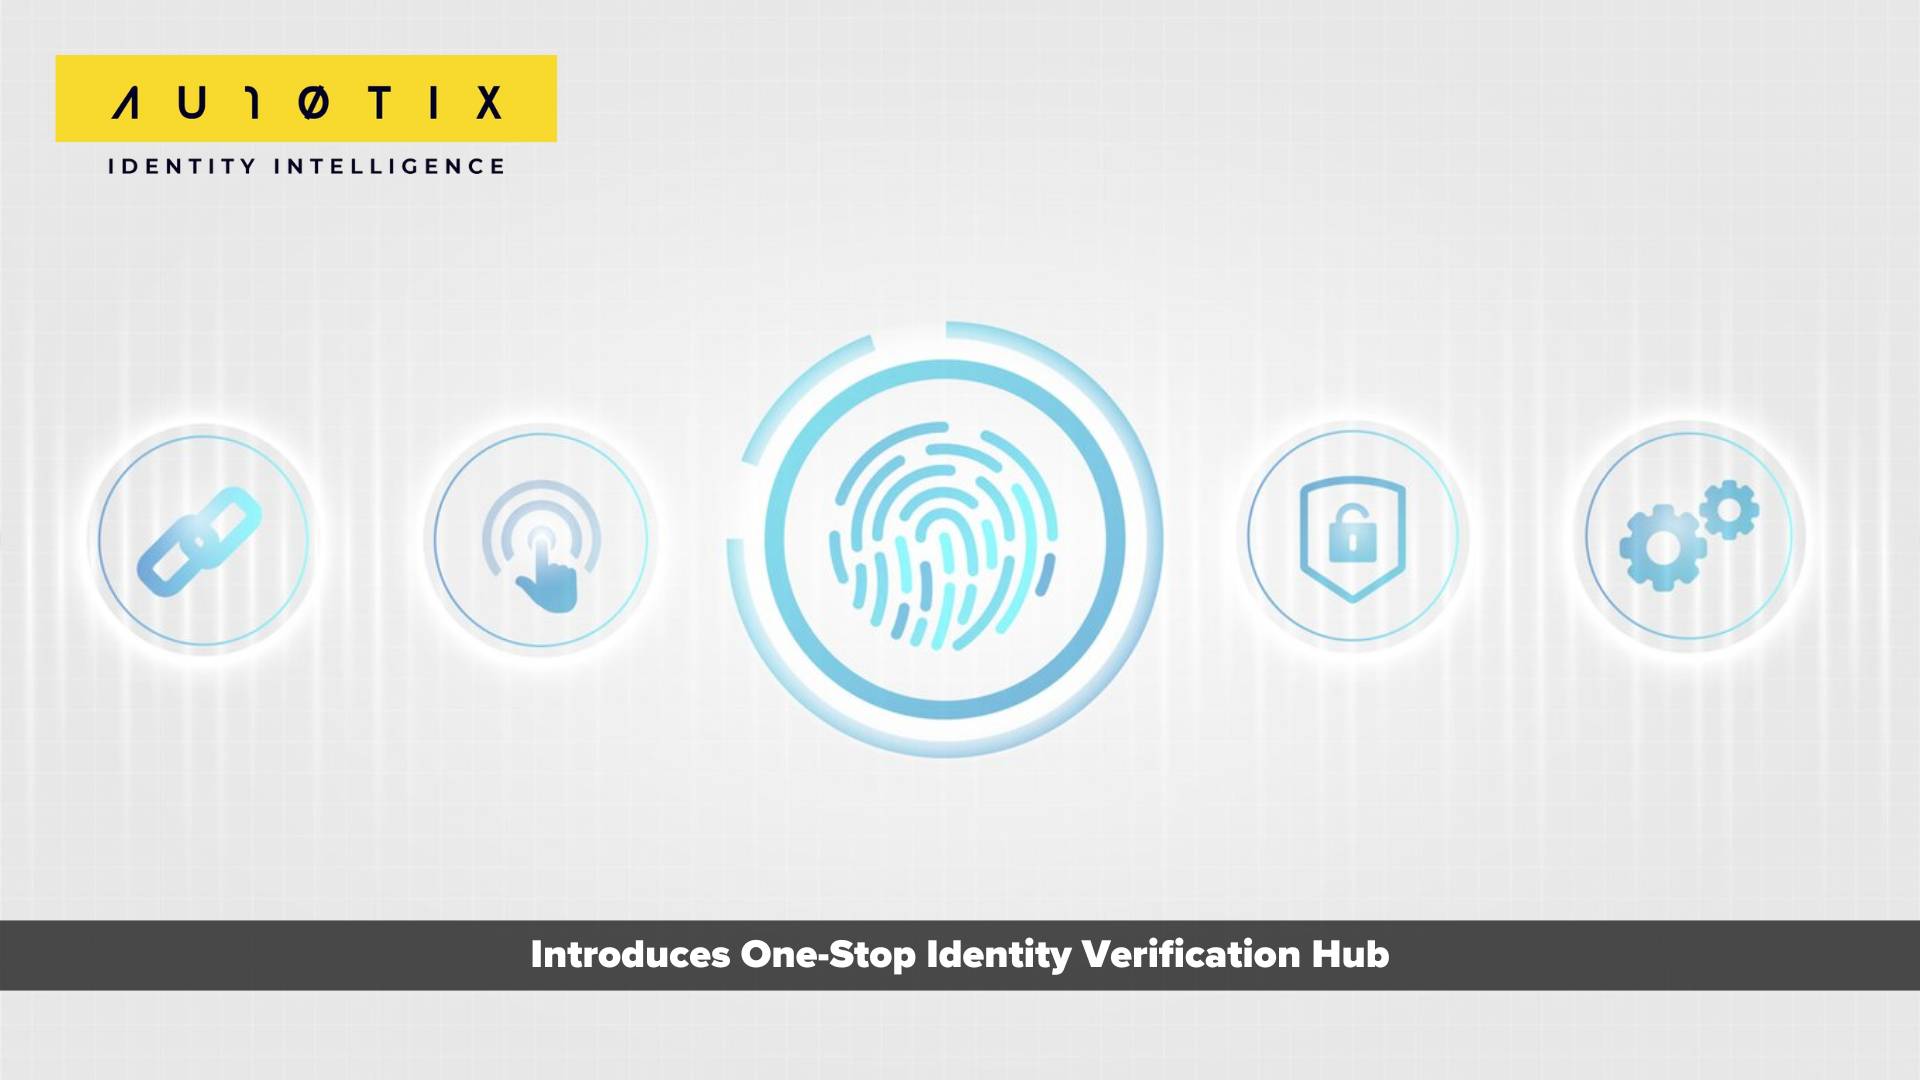 AU10TIX Introduces One-Stop Identity Verification Hub to Enable the Transition to Digital Identity